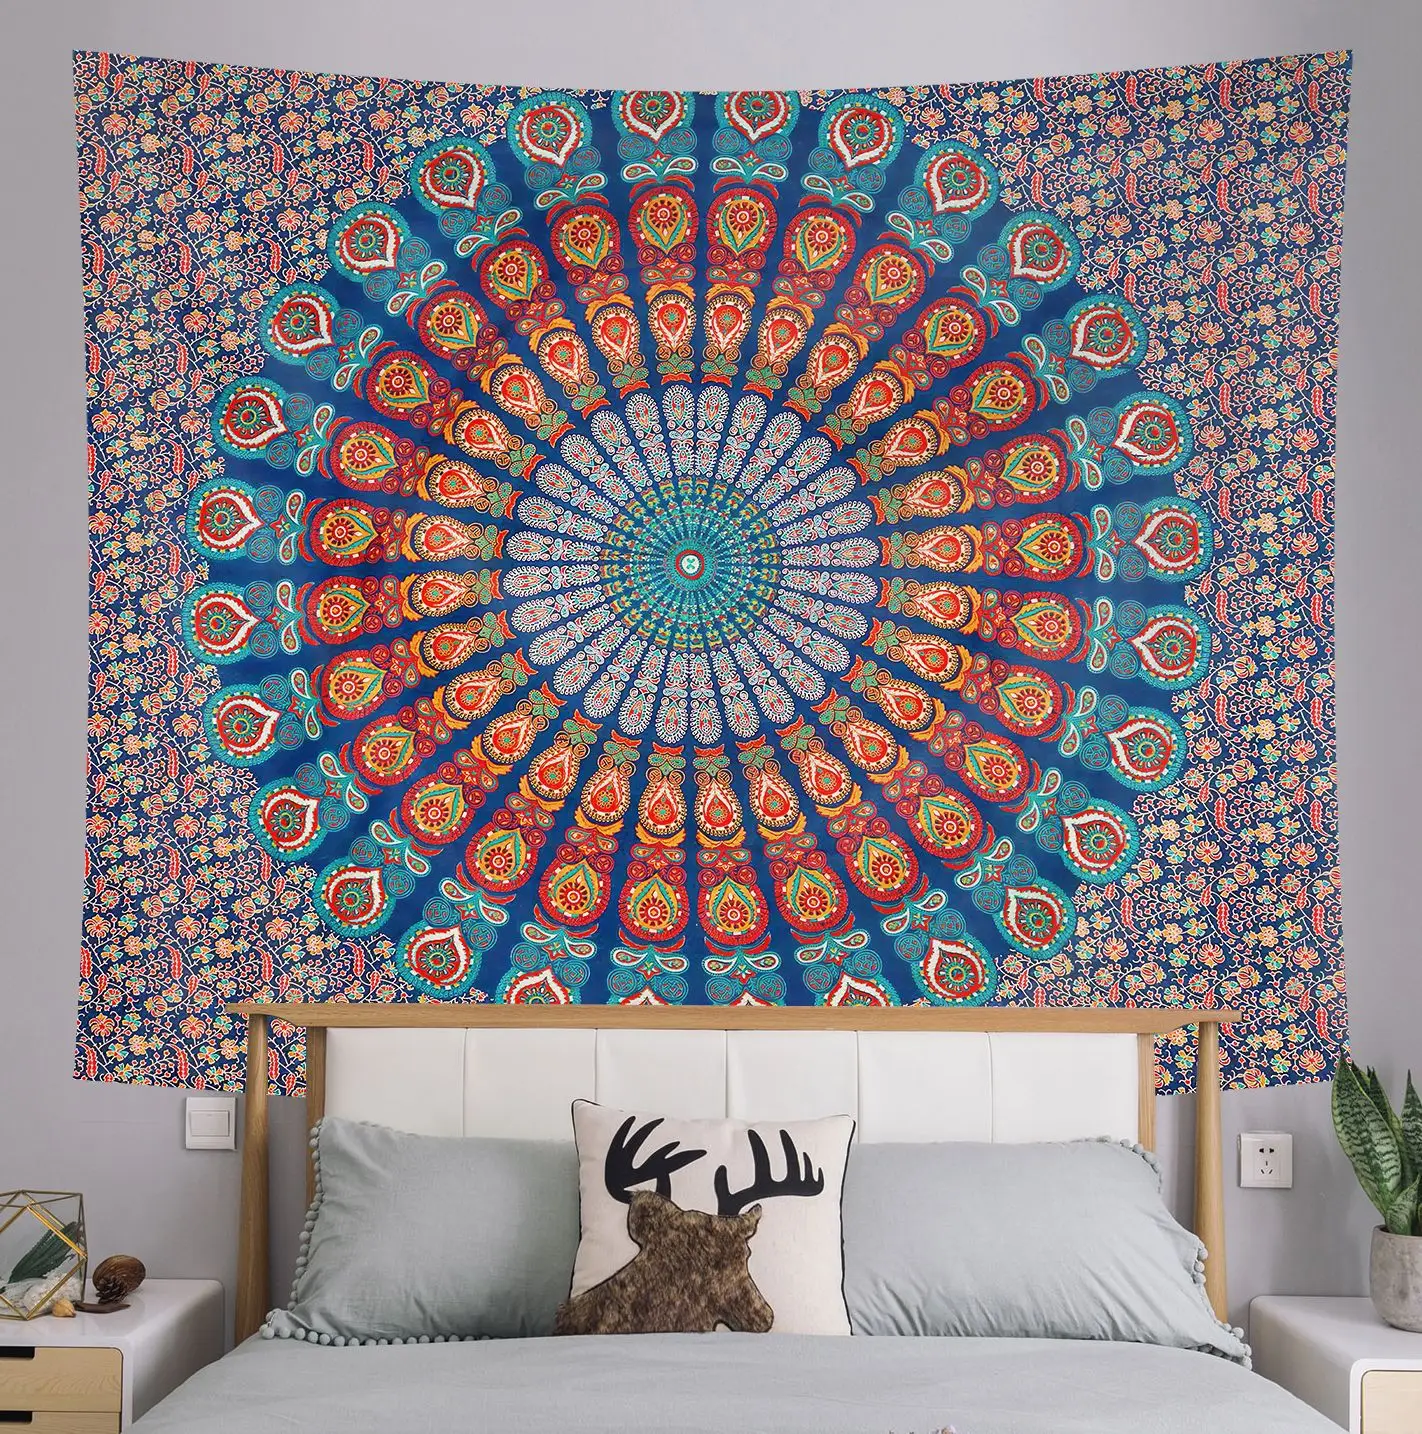 Indie Hippie Wall Spiritual Tapestry - Boho Peacock Mandala Bedroom Art  Hanging Home Decor Aesthetic For Dorm Tablecloth,Sofa  Cover,Bedspread,Curtain